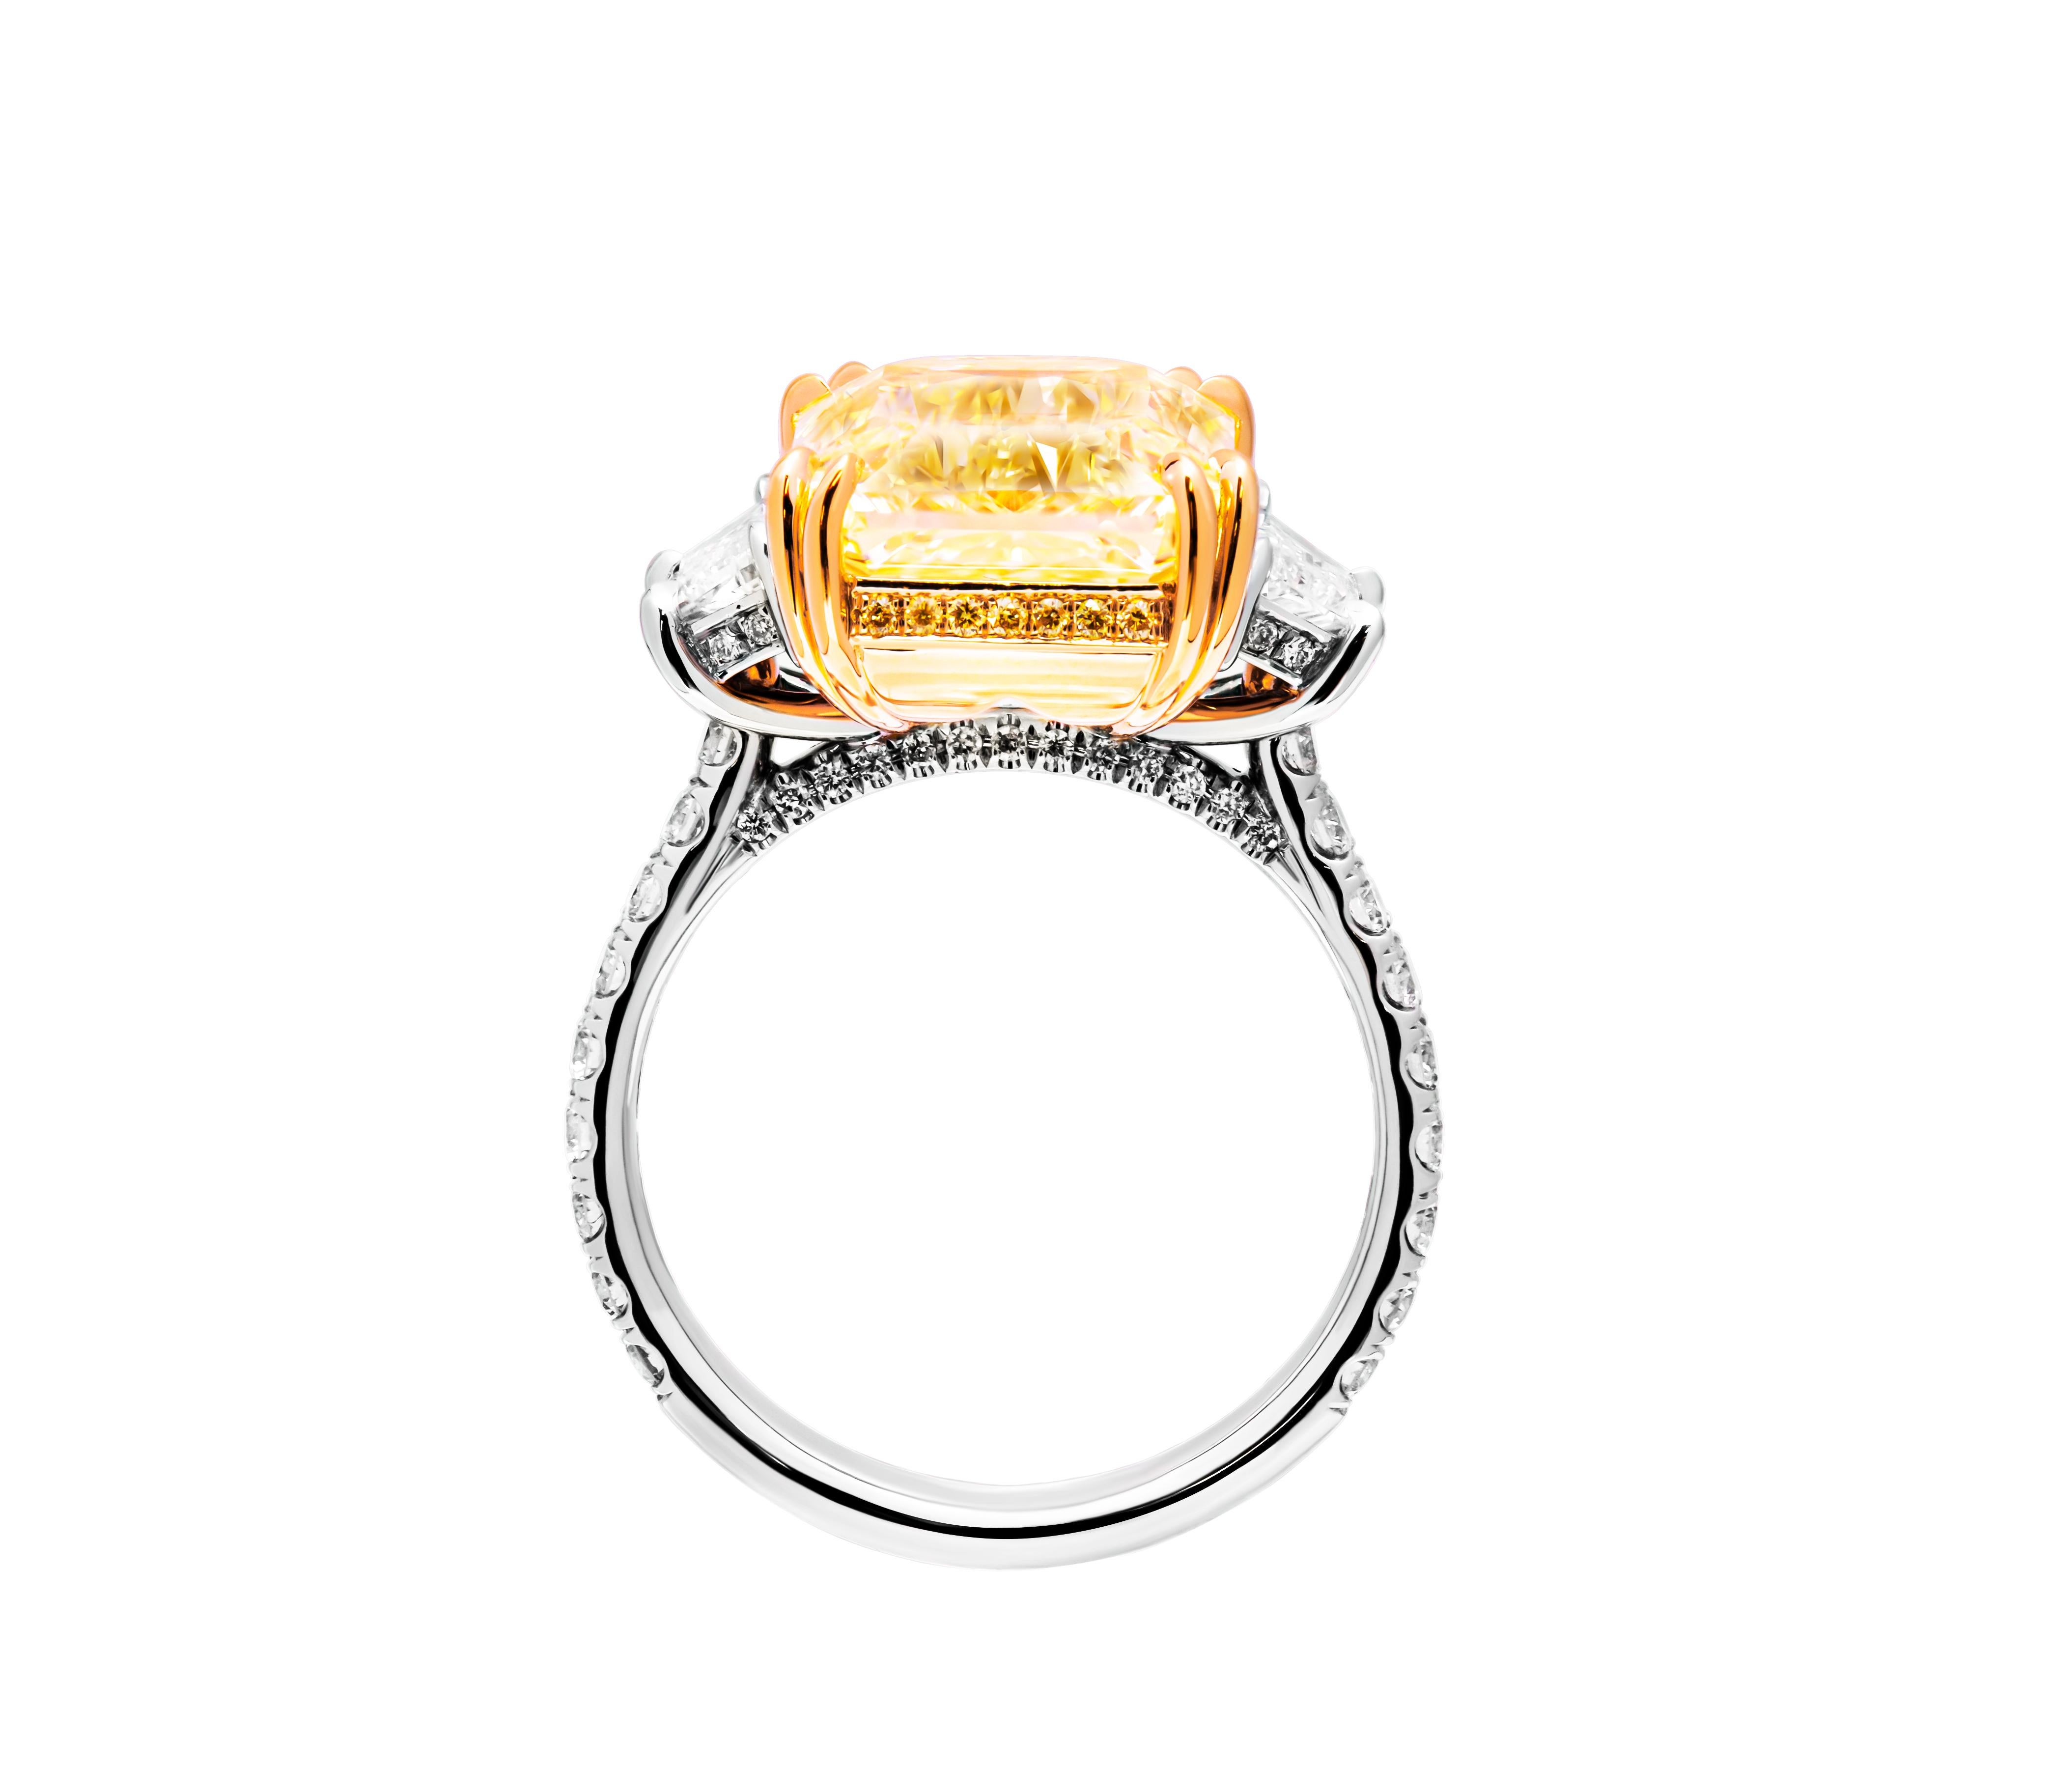 Modern GIA Certified 3 stone ring with 8.02ct Fancy Light Yellow Radiant Cut Diamond For Sale